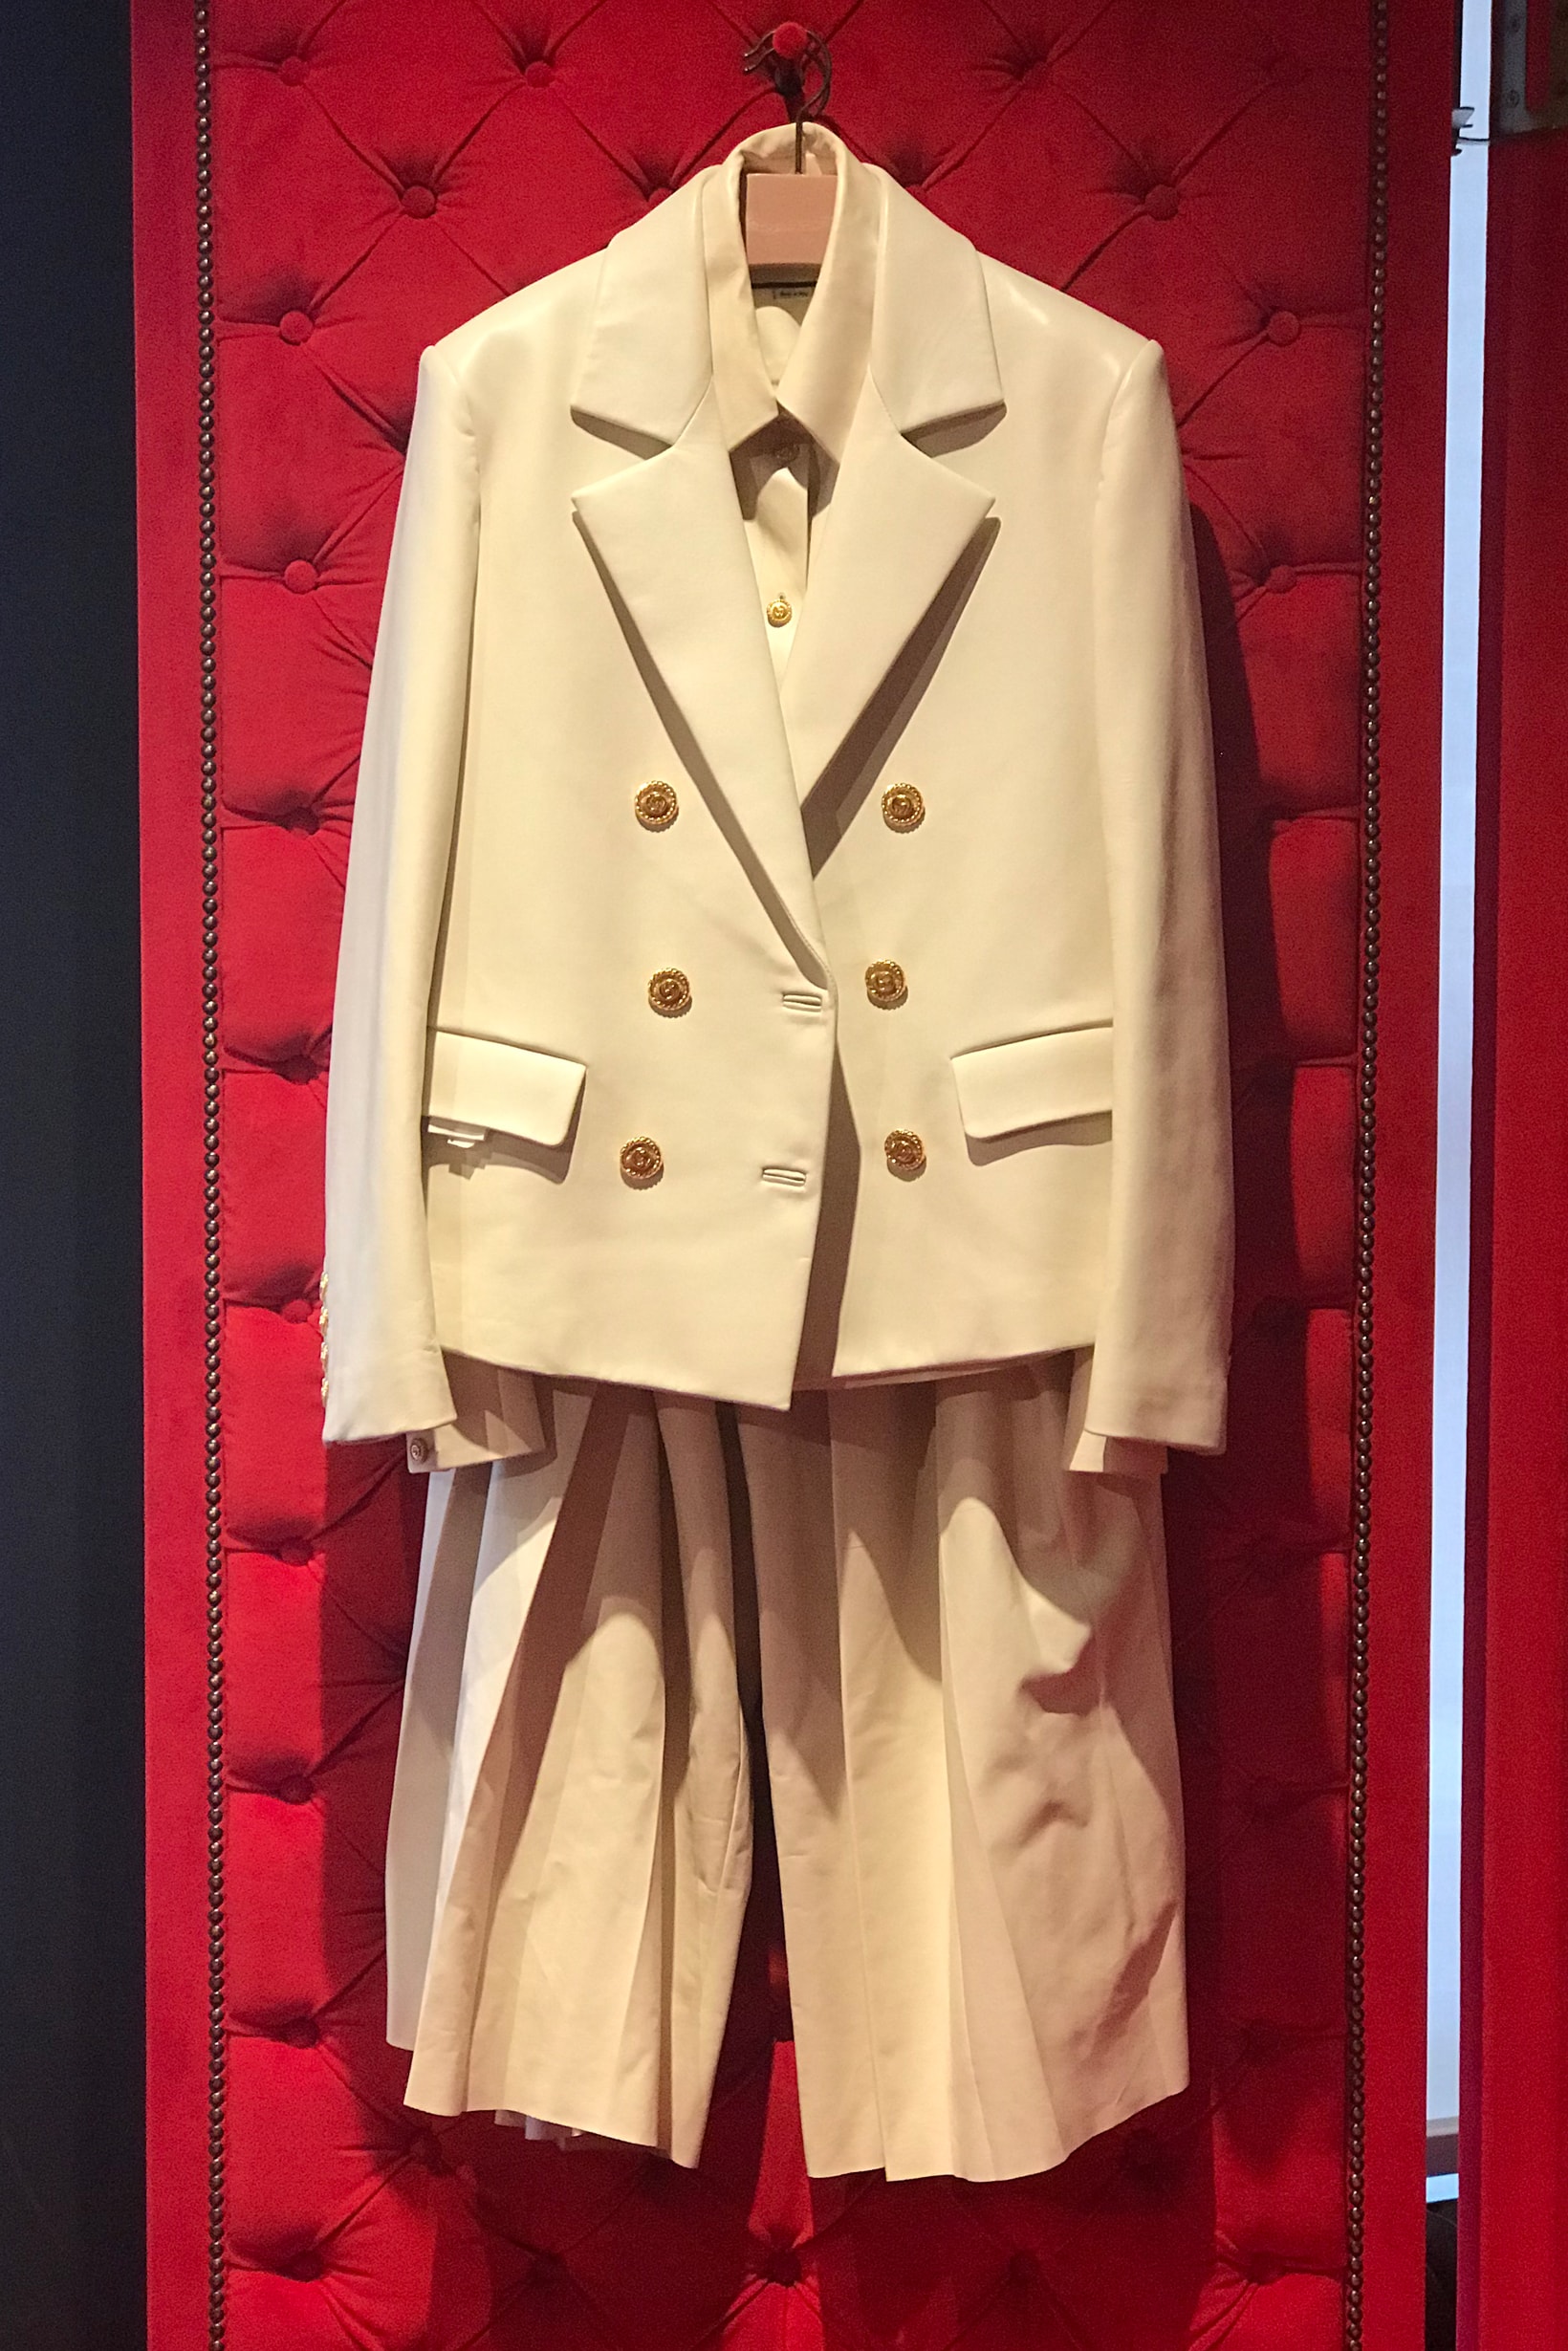 Gucci Fall Winter 2019 Collection Suit Blazer Pants Cream